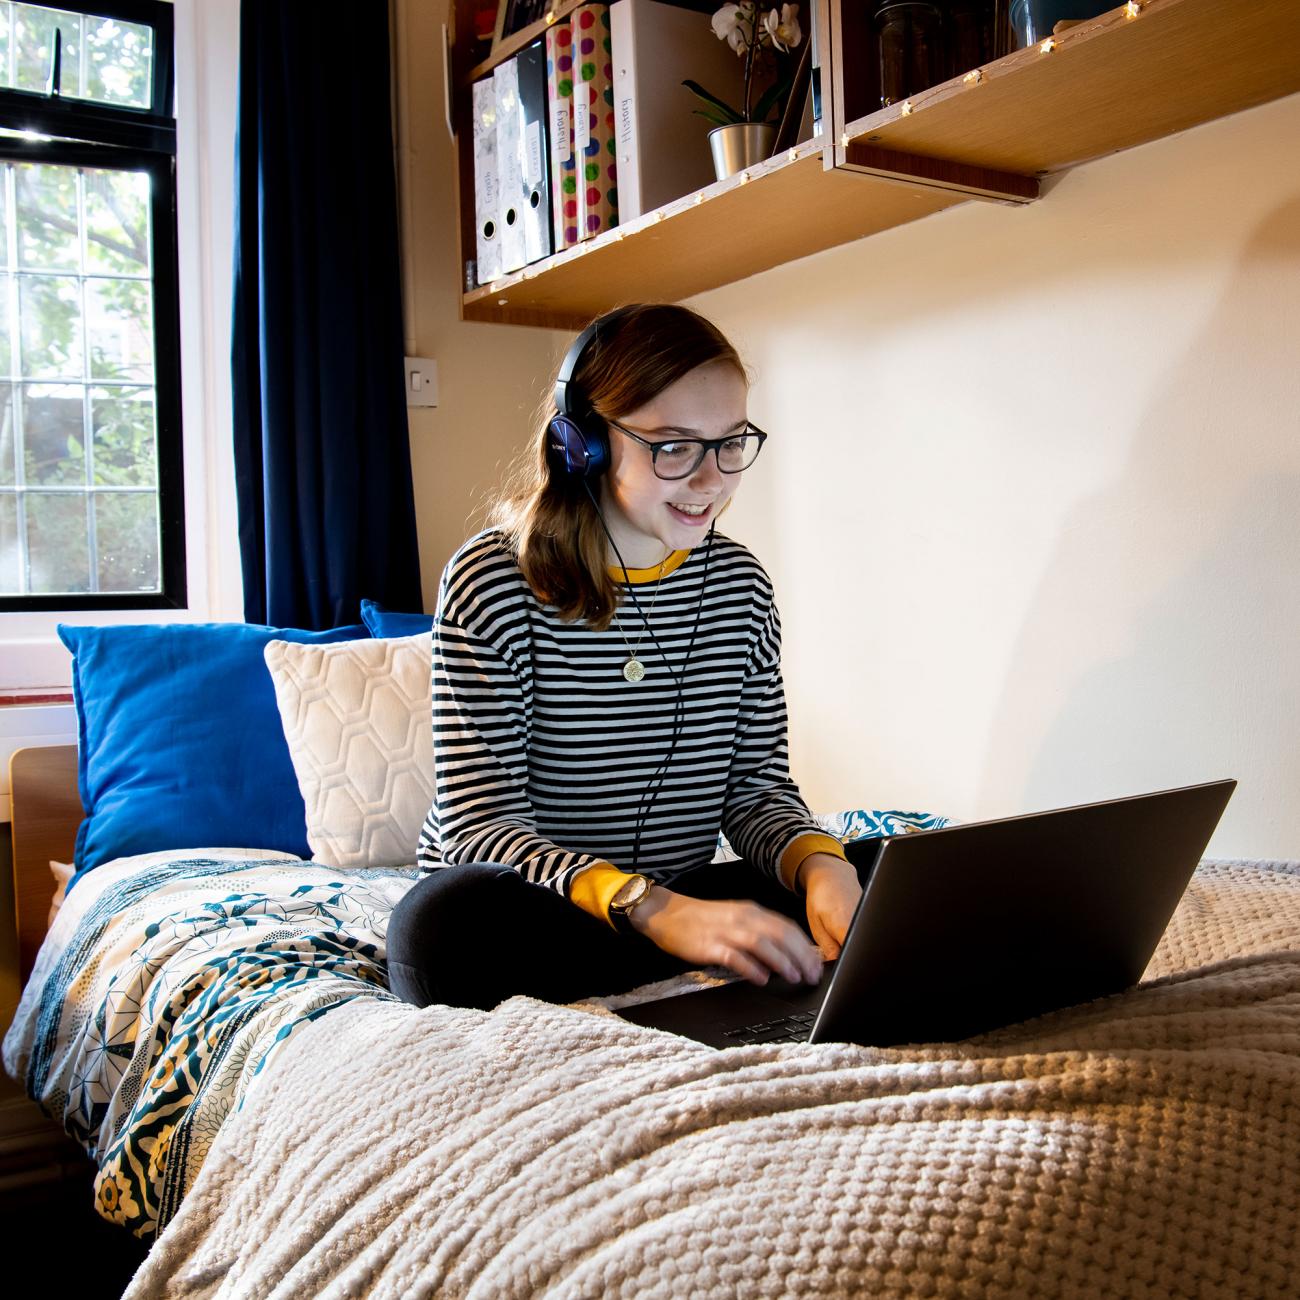 A student sits cross-legged on a bed, working on a laptop. The room is partially lit with a lamp, a window lets in some light.